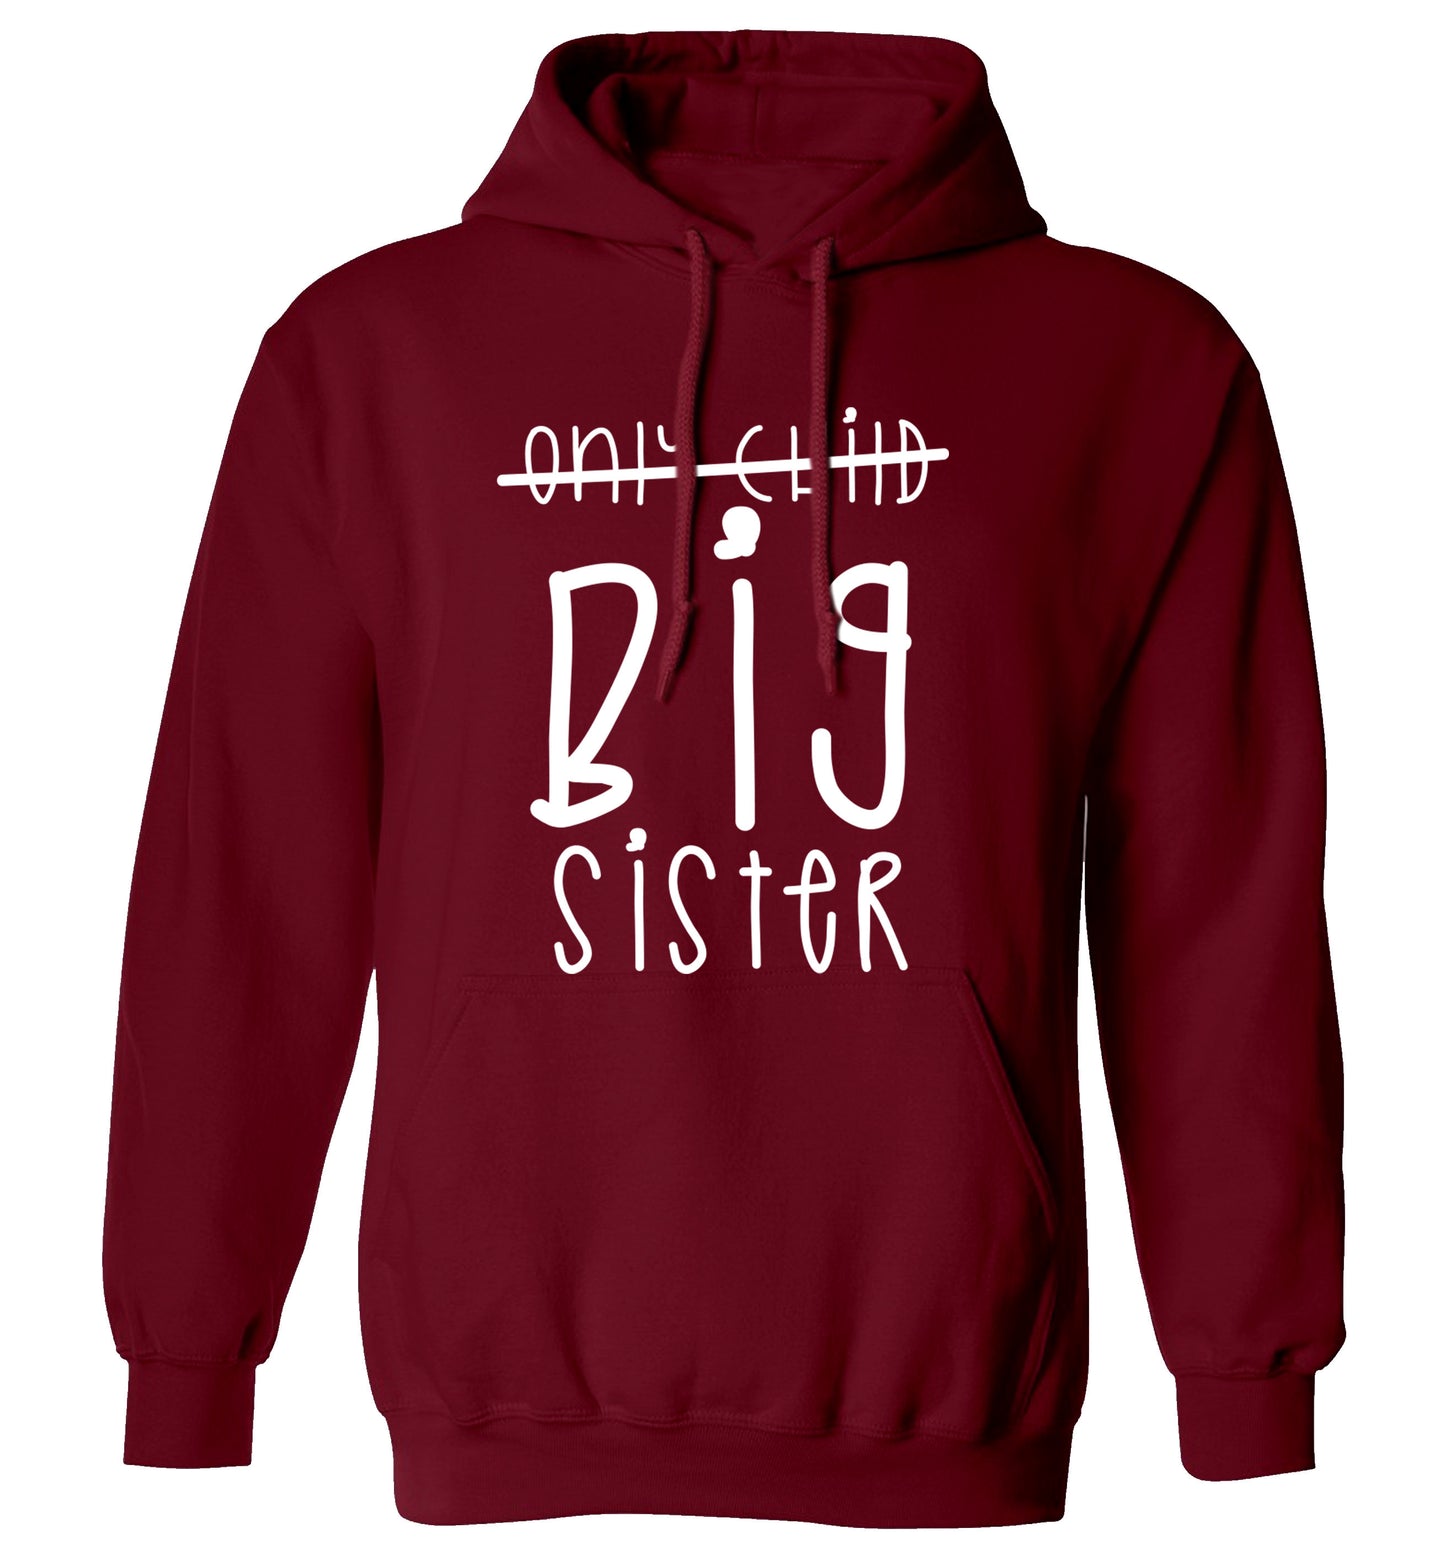 Only child big sister adults unisex maroon hoodie 2XL